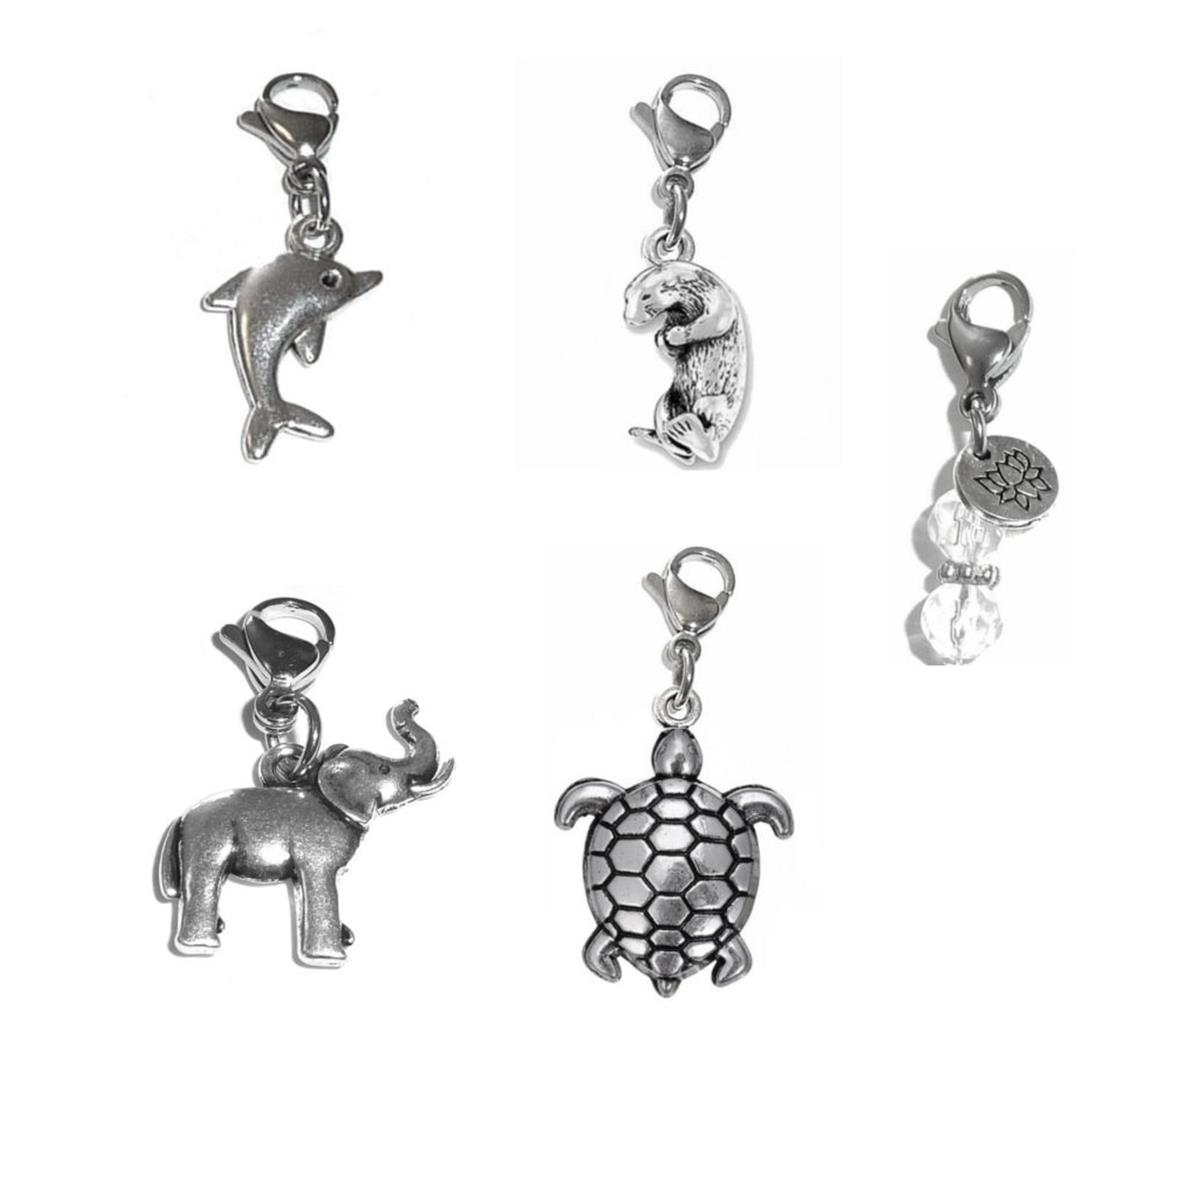 Animal Charms Clip on to Anything Perfect for Charm Bracelets and Necklaces, Bag or Purse Charms, Backpacks, Zipper Pulls - Mixed Wildlife Charms